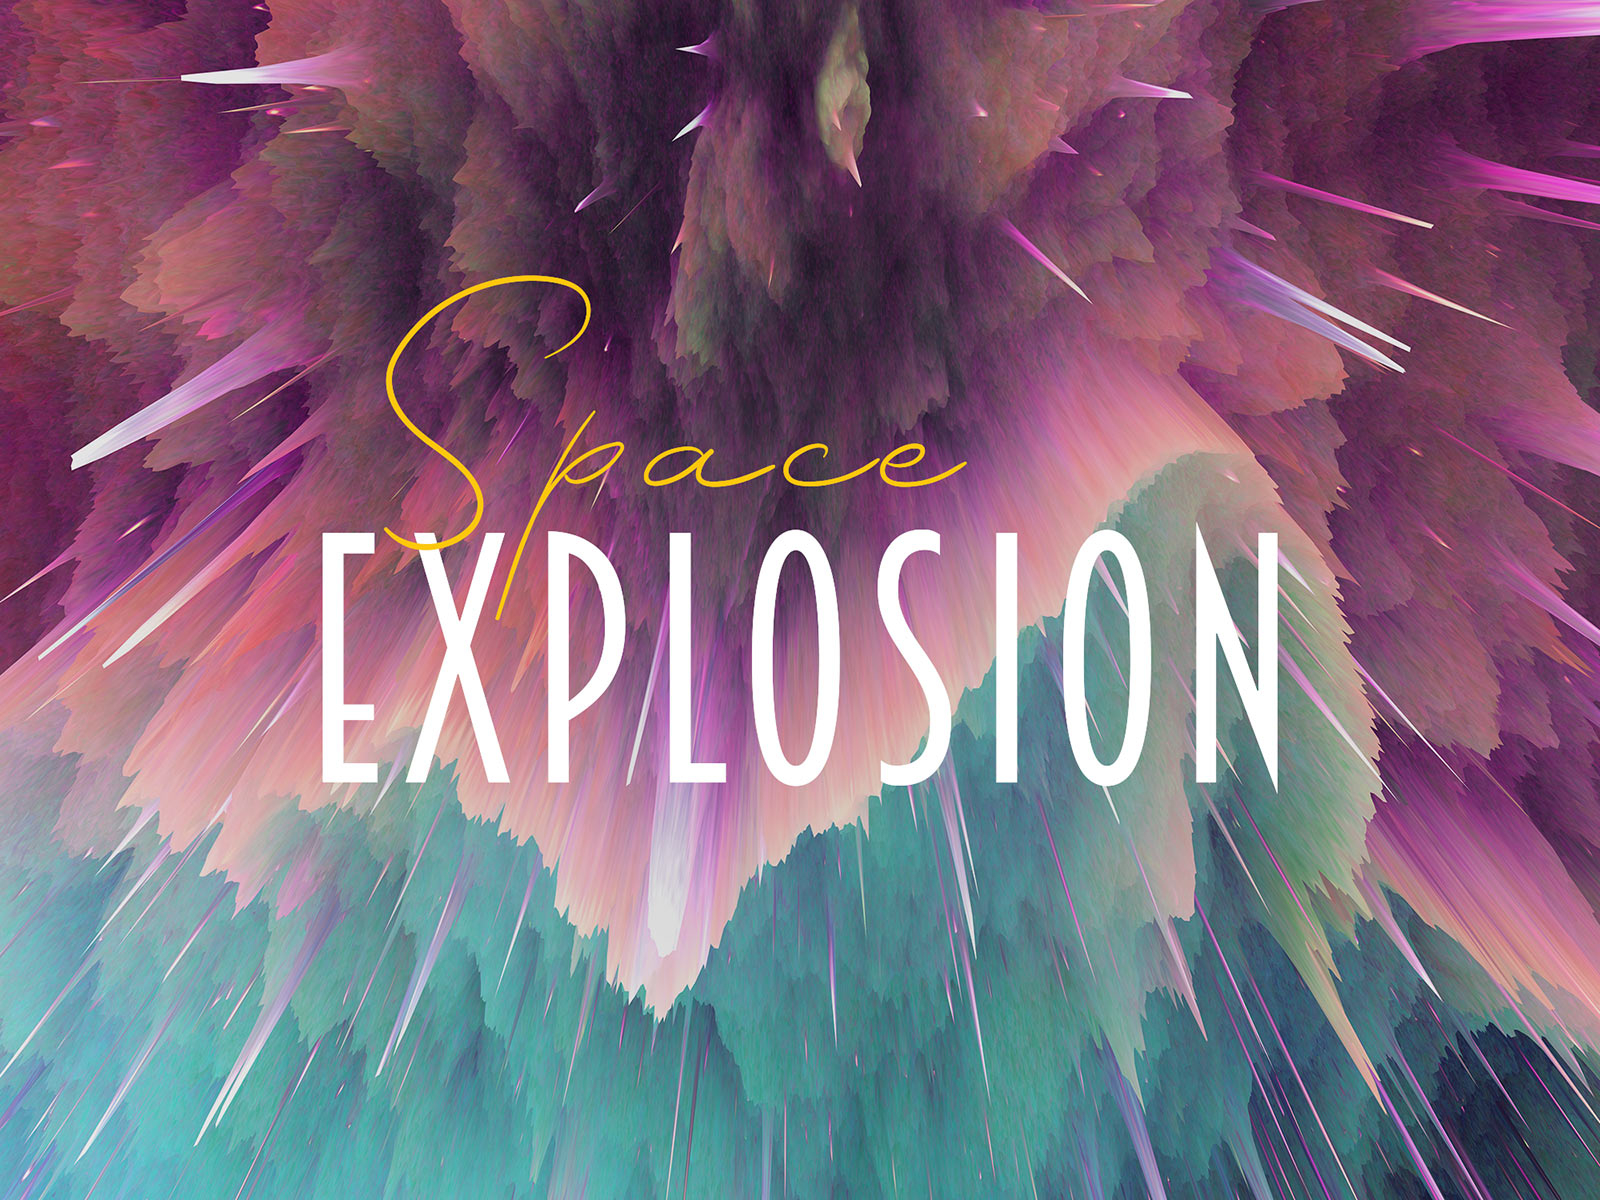 Space Explosion Backgrounds background download explosion futuristic pixelbuddha space texture visual effect